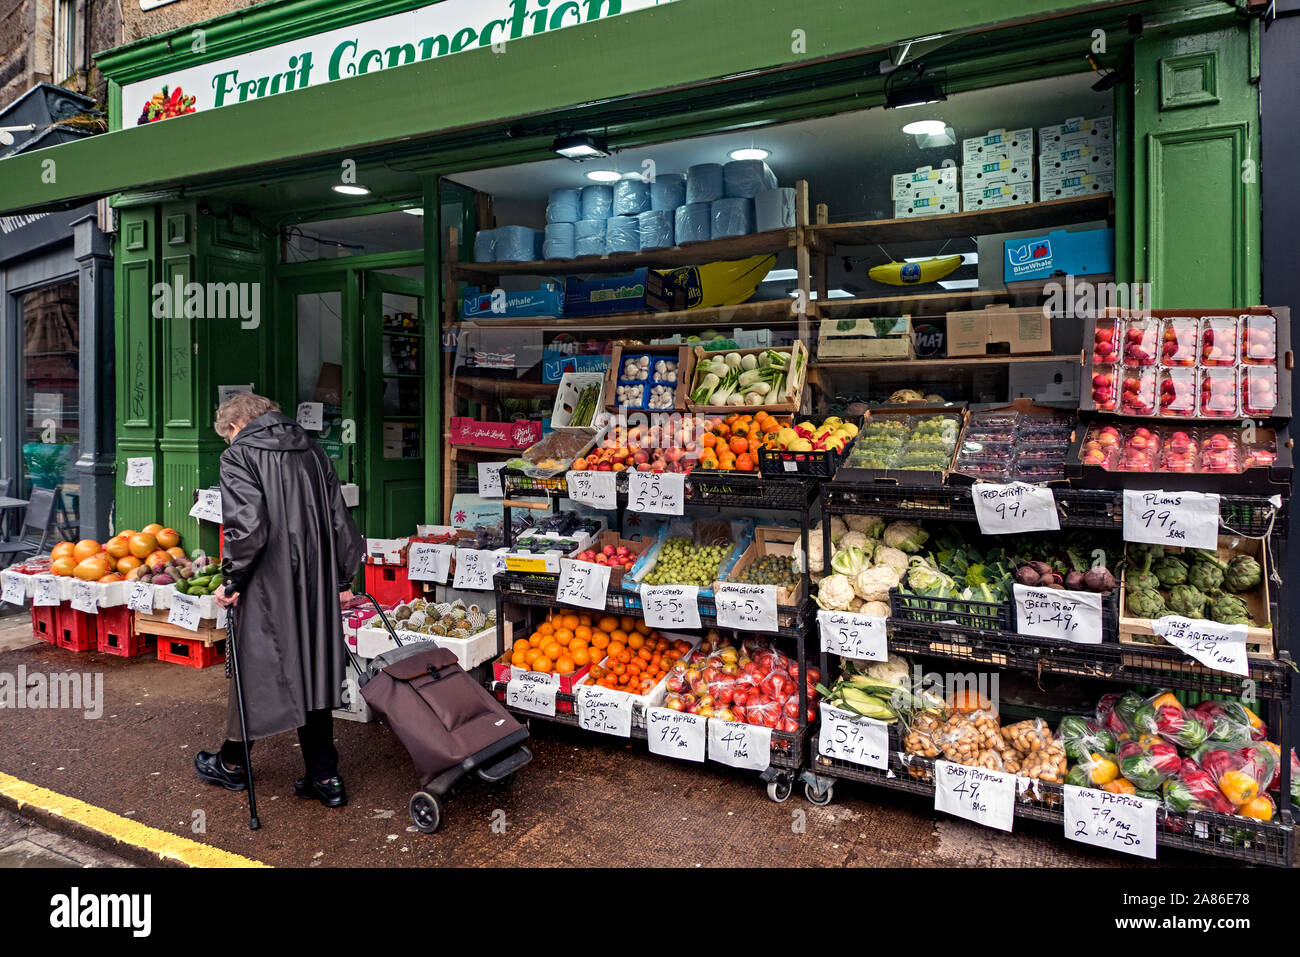 An elderly woman with her shopping trolley walks by a greengrocer's shop in Newington, Edinburgh, Scotland, UK. Stock Photo